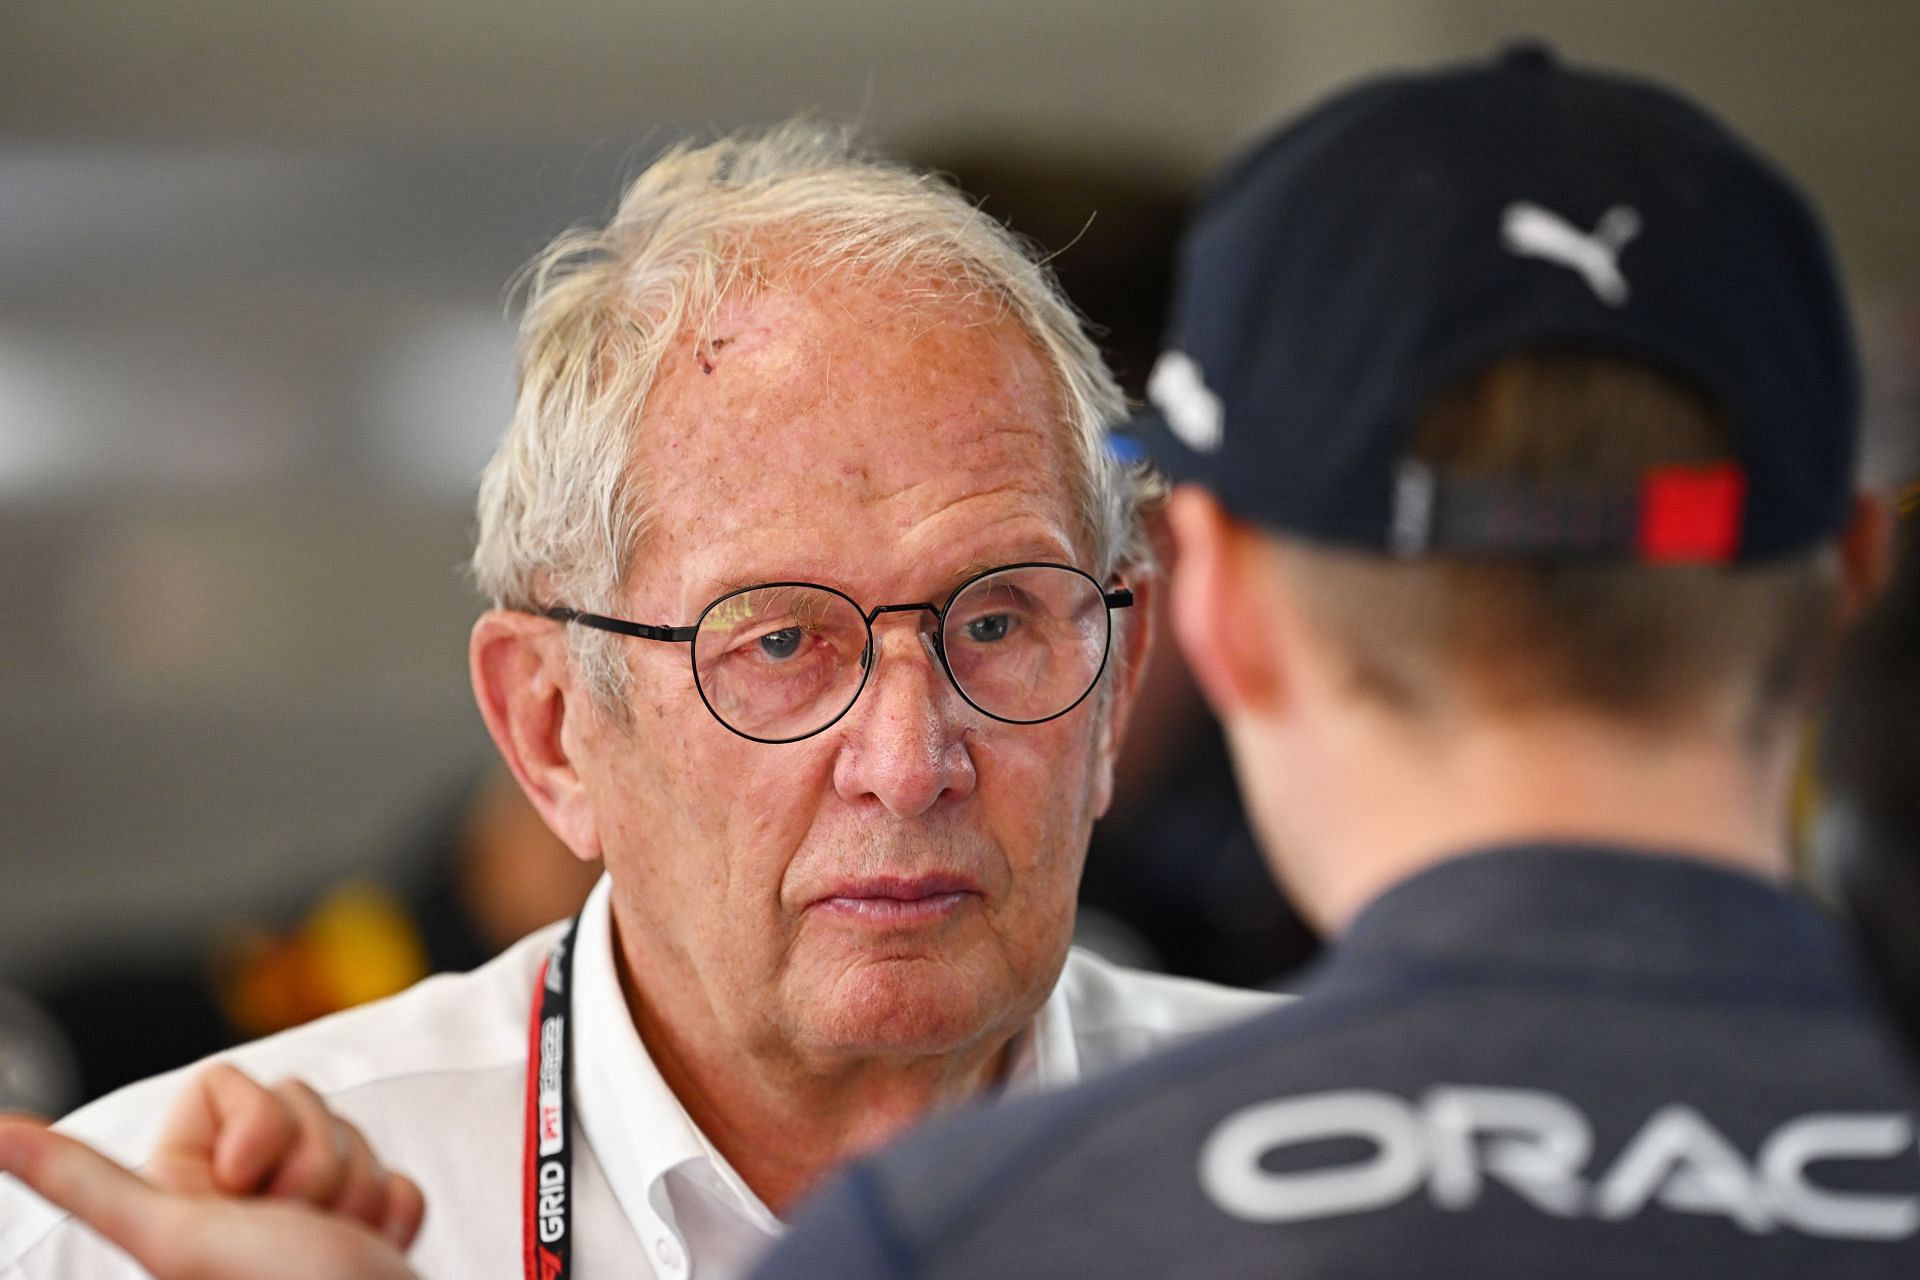 Dr. Helmut Marko during the F1 Grand Prix of Spain - Final Practice